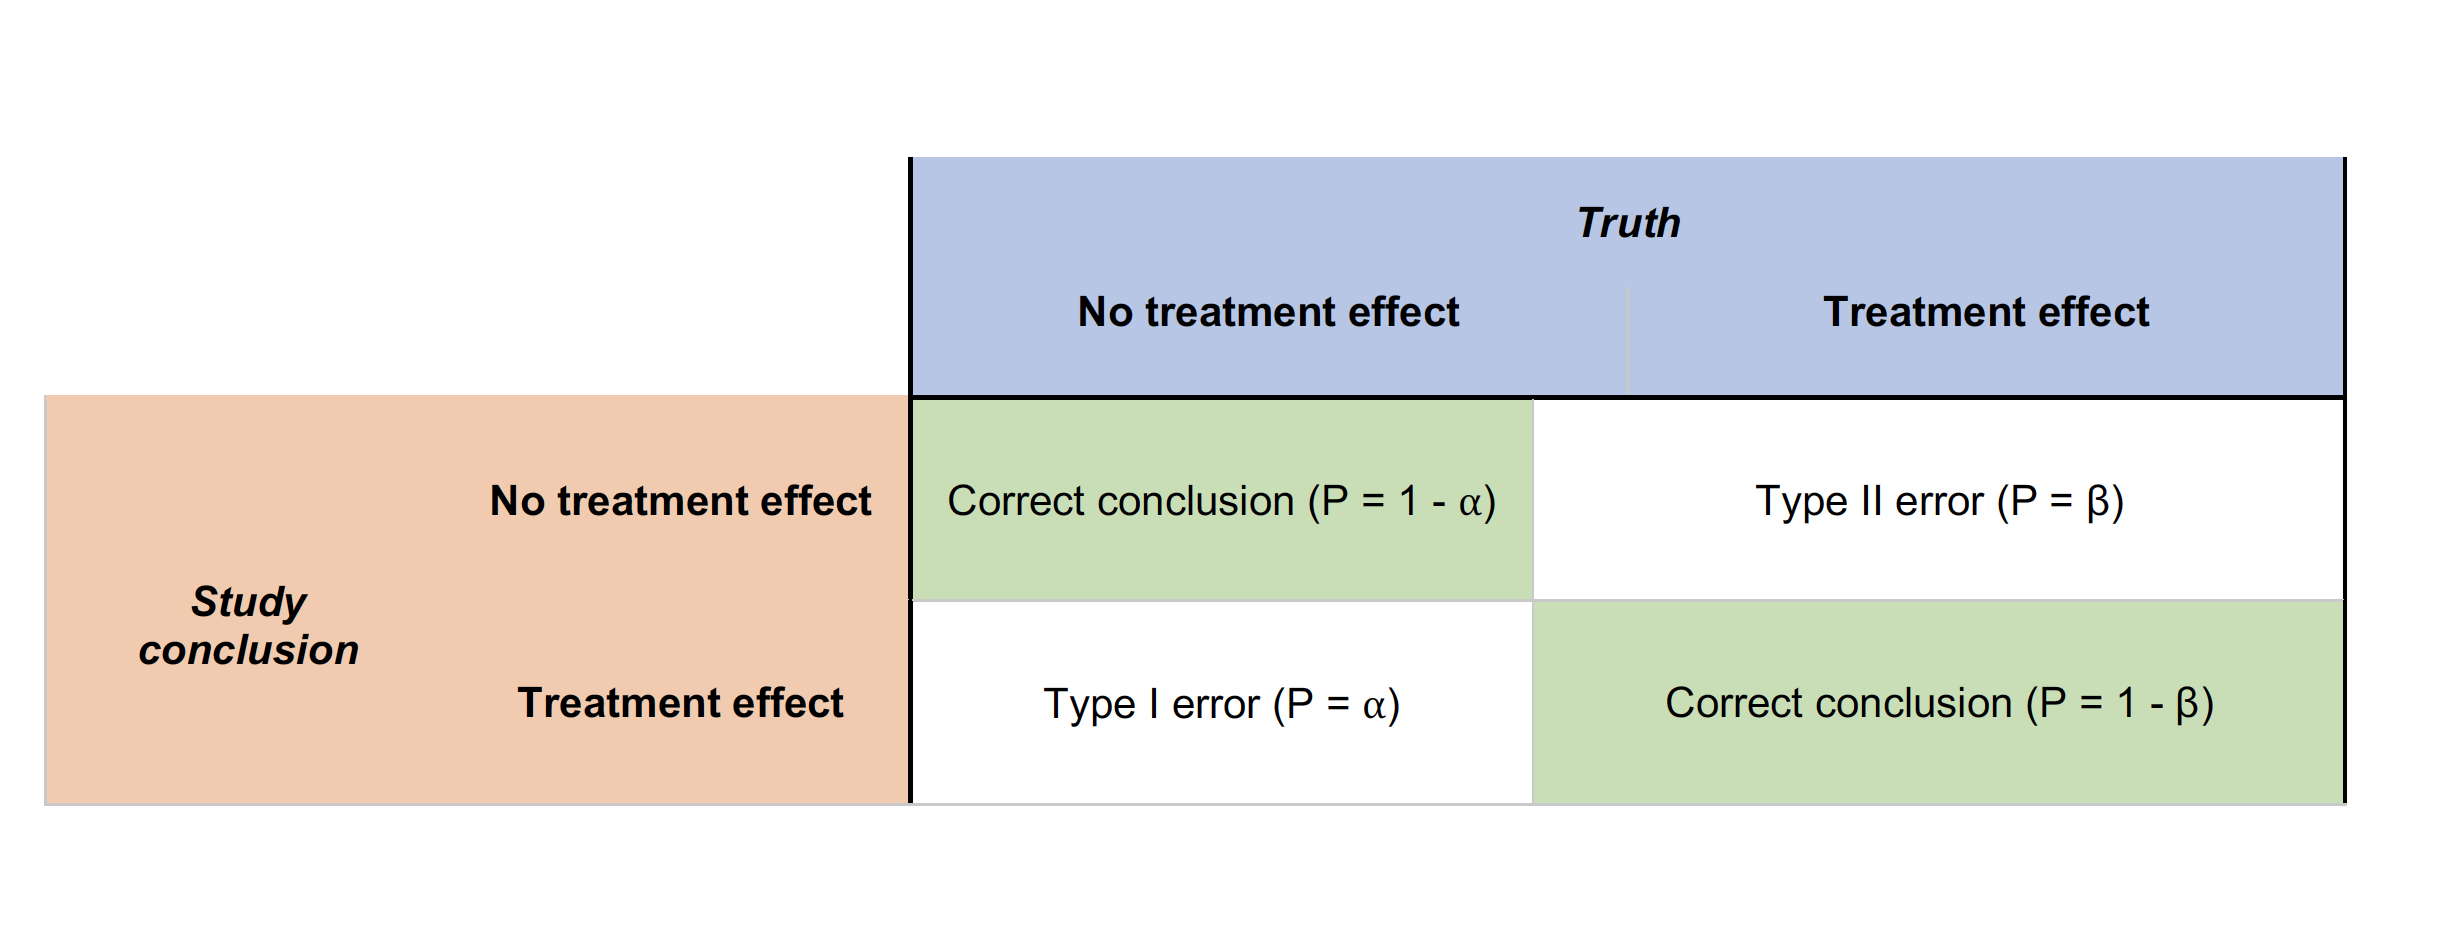 table of type I and type II errors